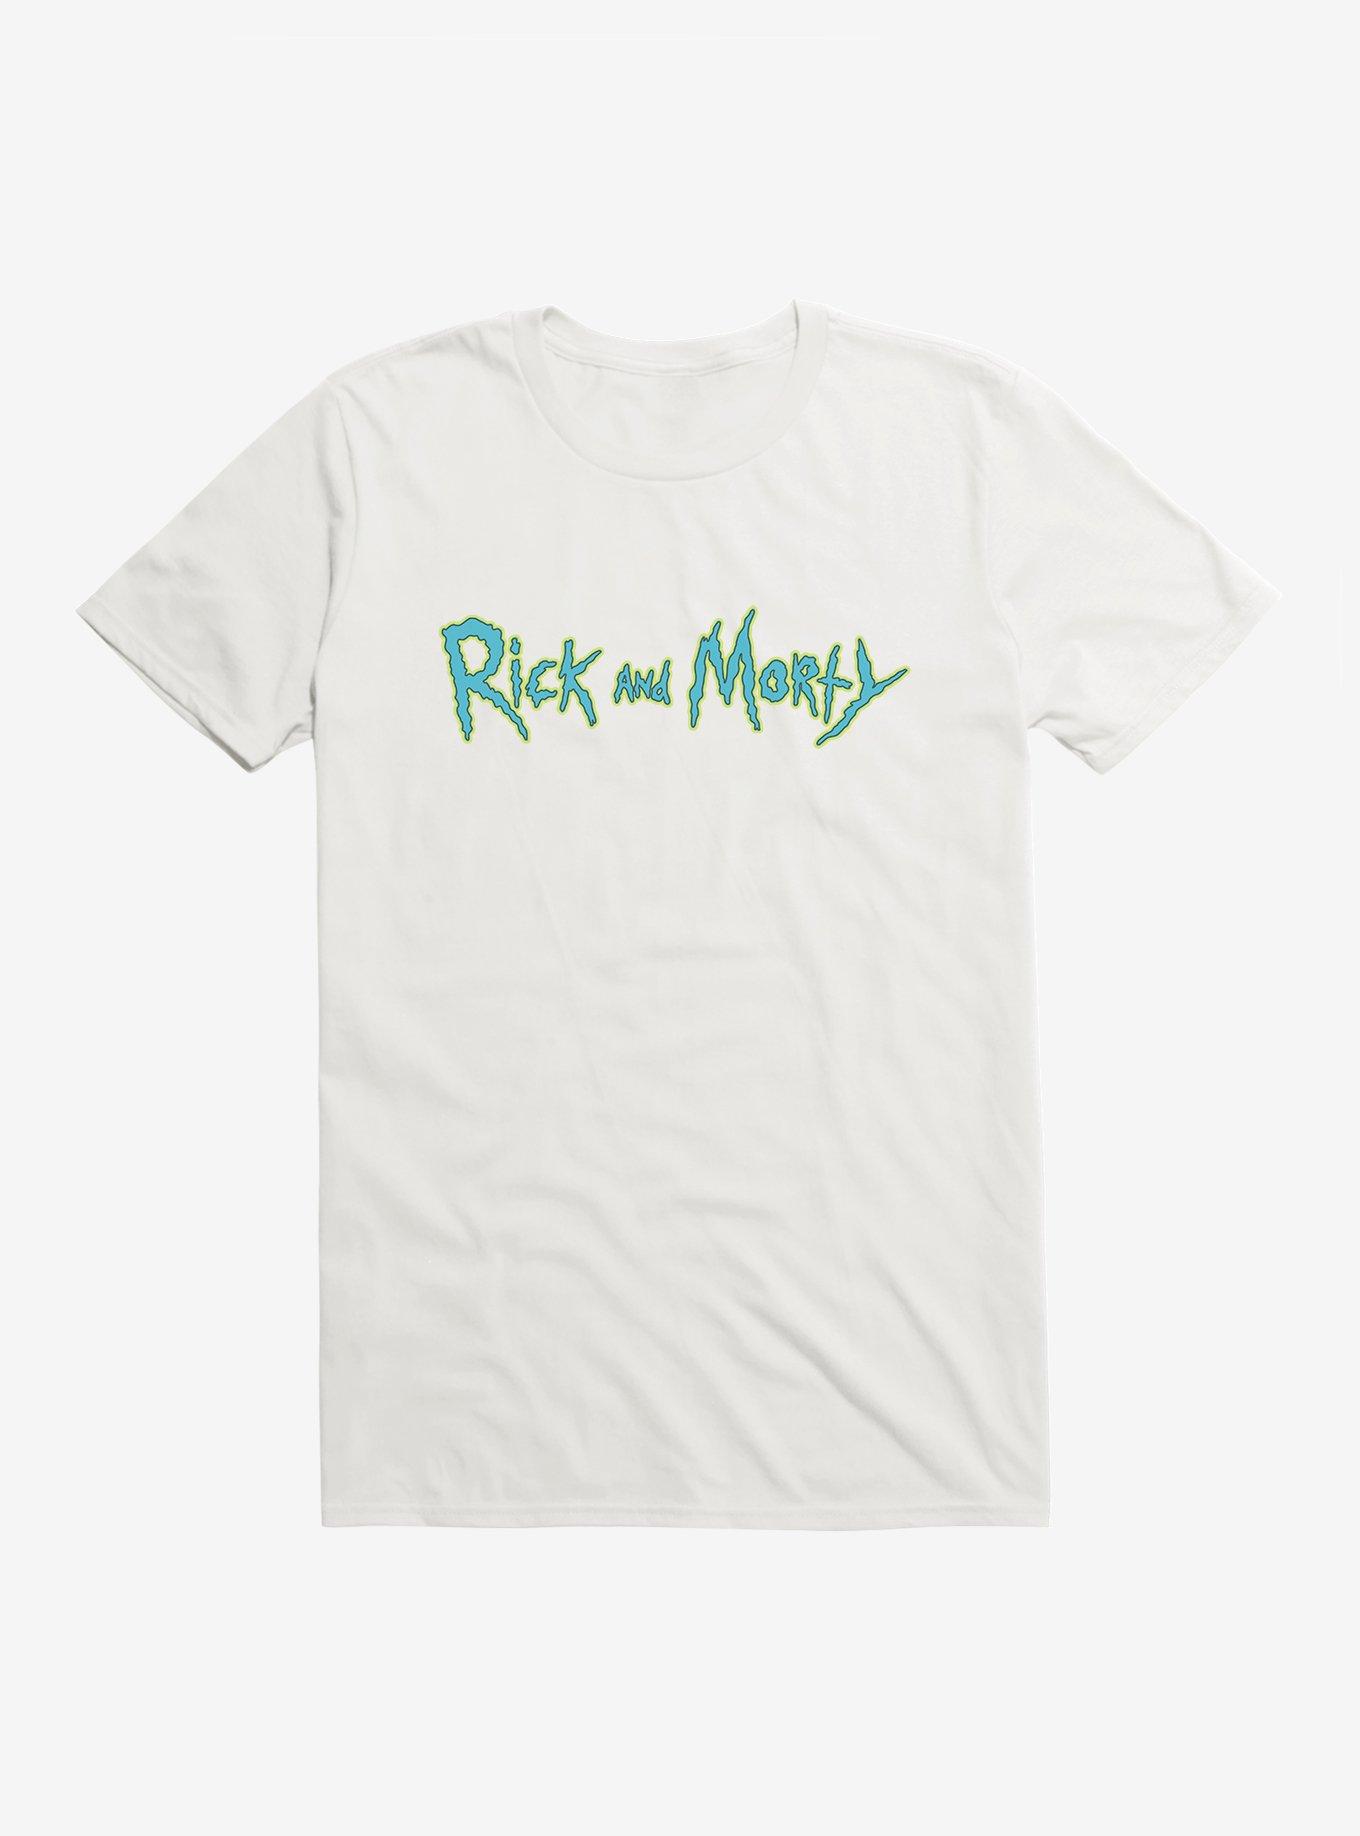 Logo Classic Topic Hot | T-Shirt Morty Rick And